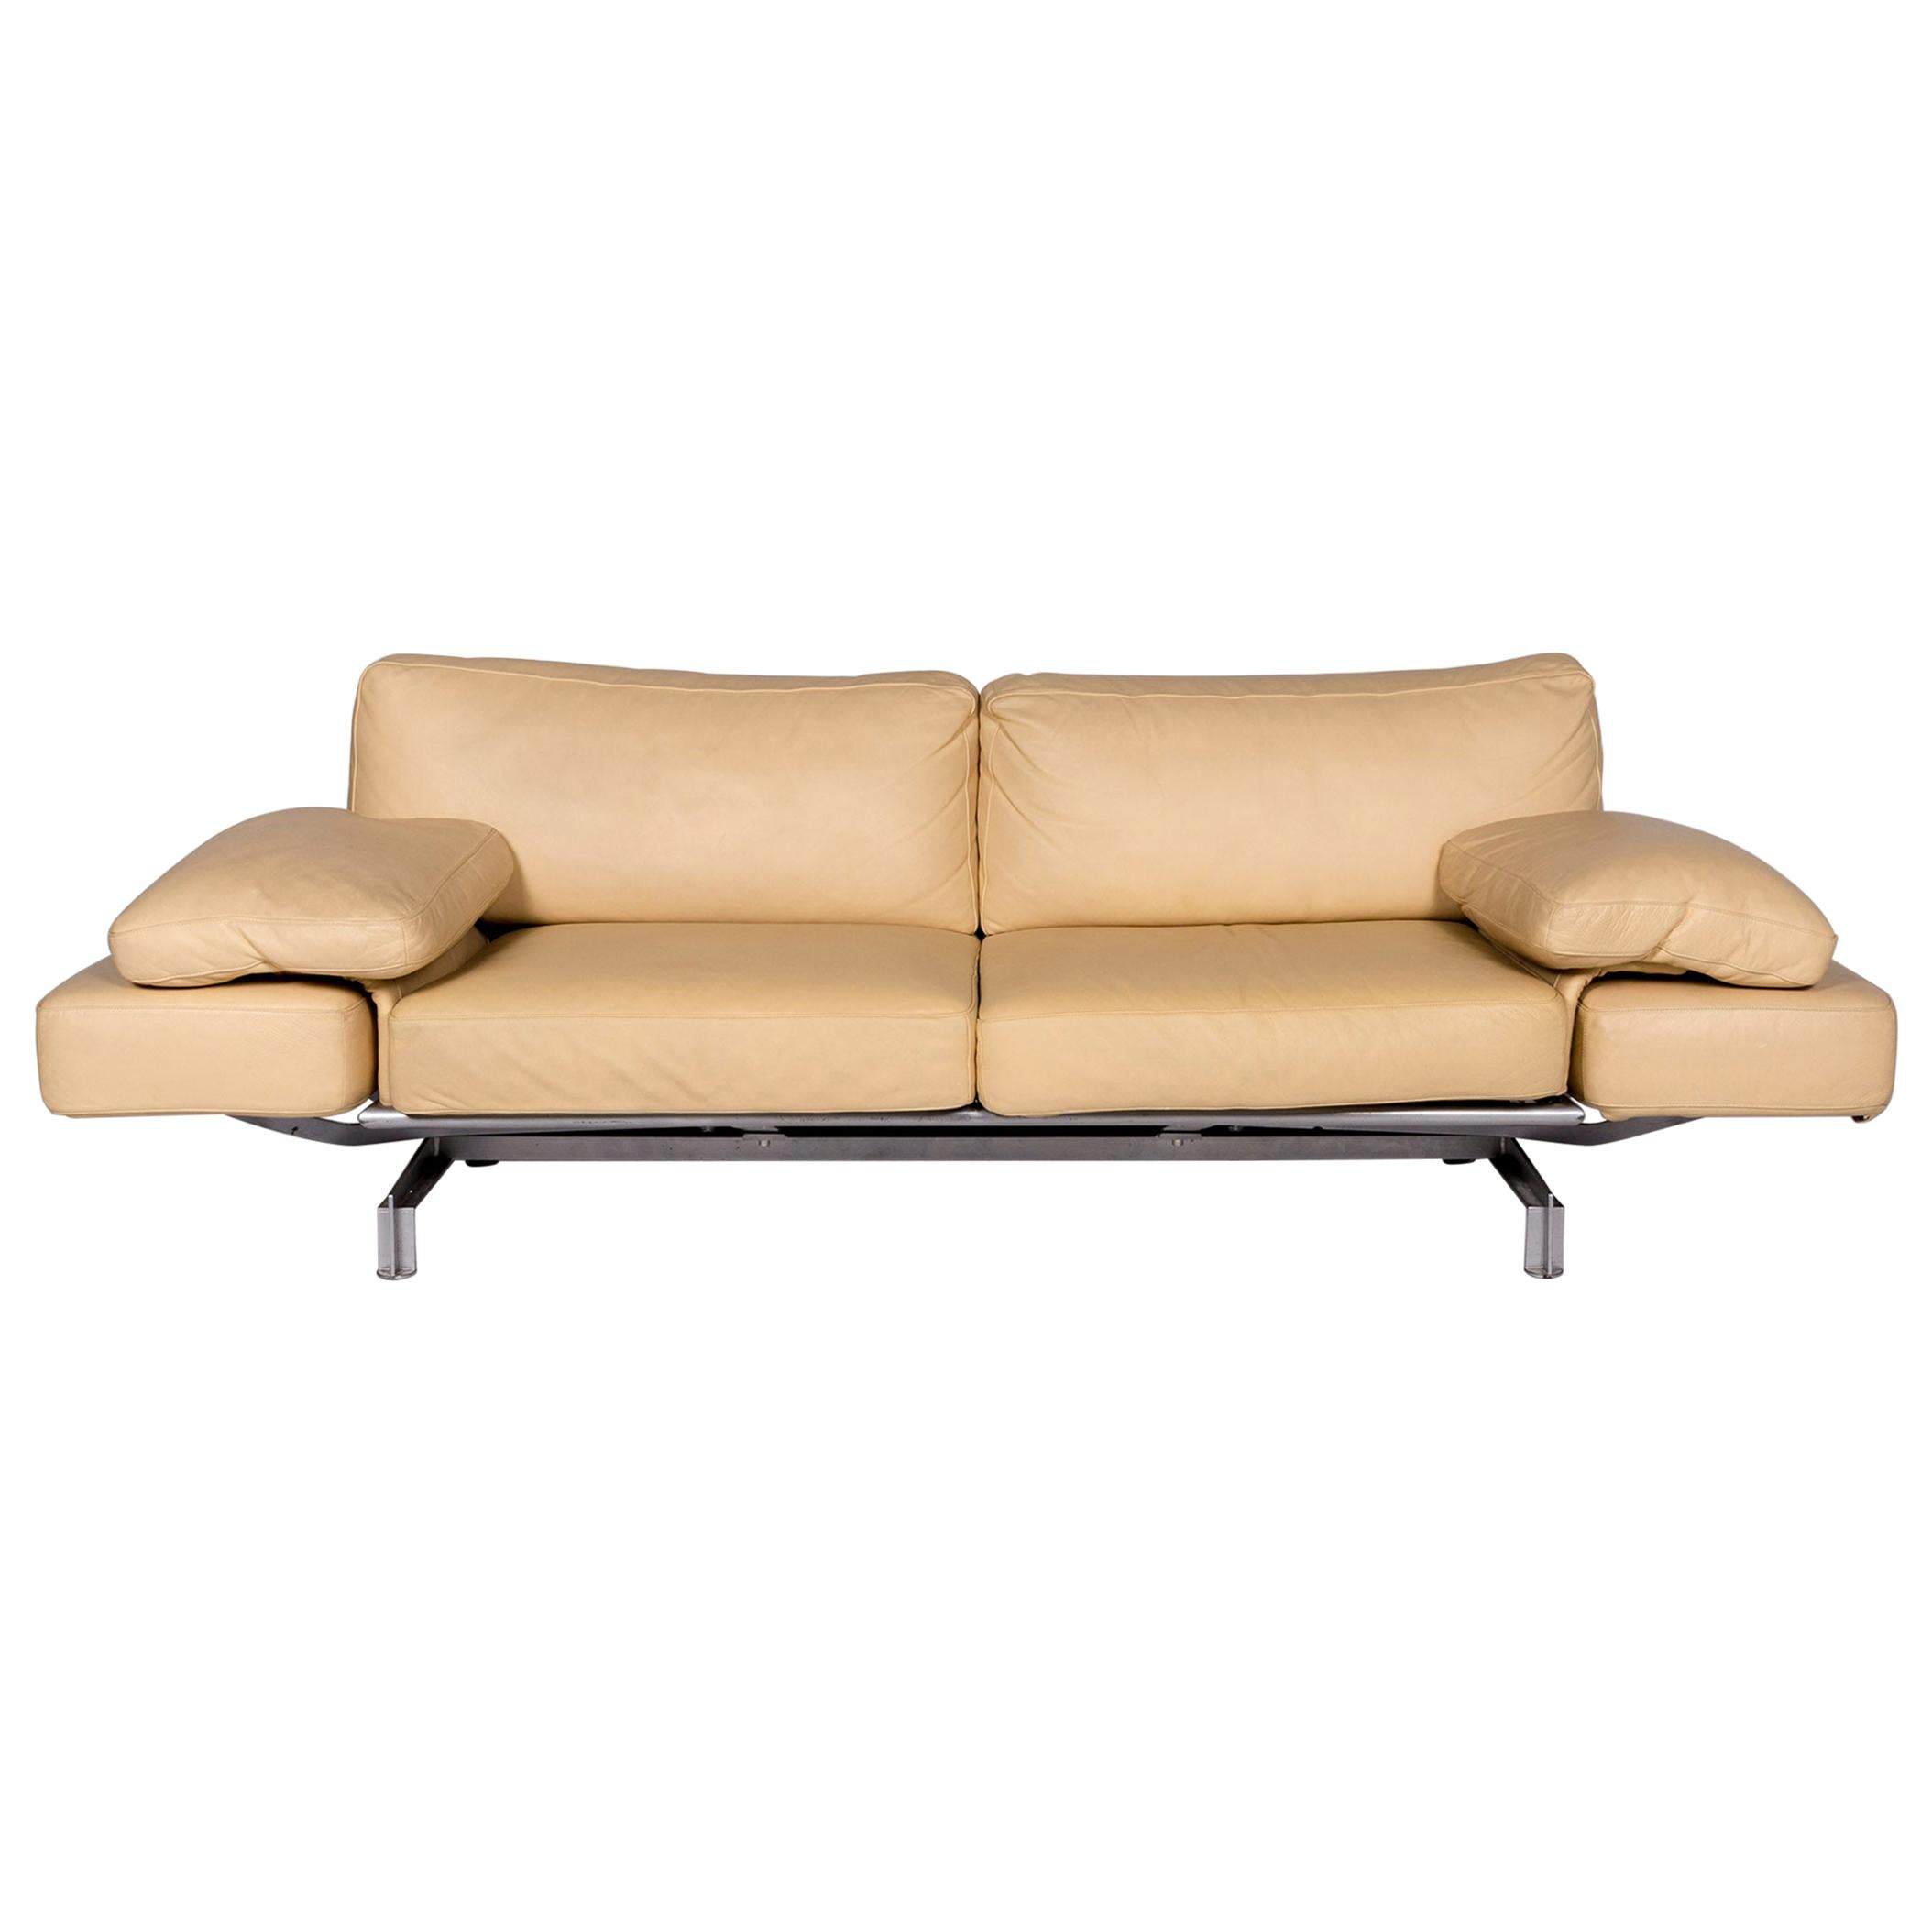 WK Wohnen Gaetano 687 Leather Sofa Beige Two-Seat Function Relaxation Couch For Sale